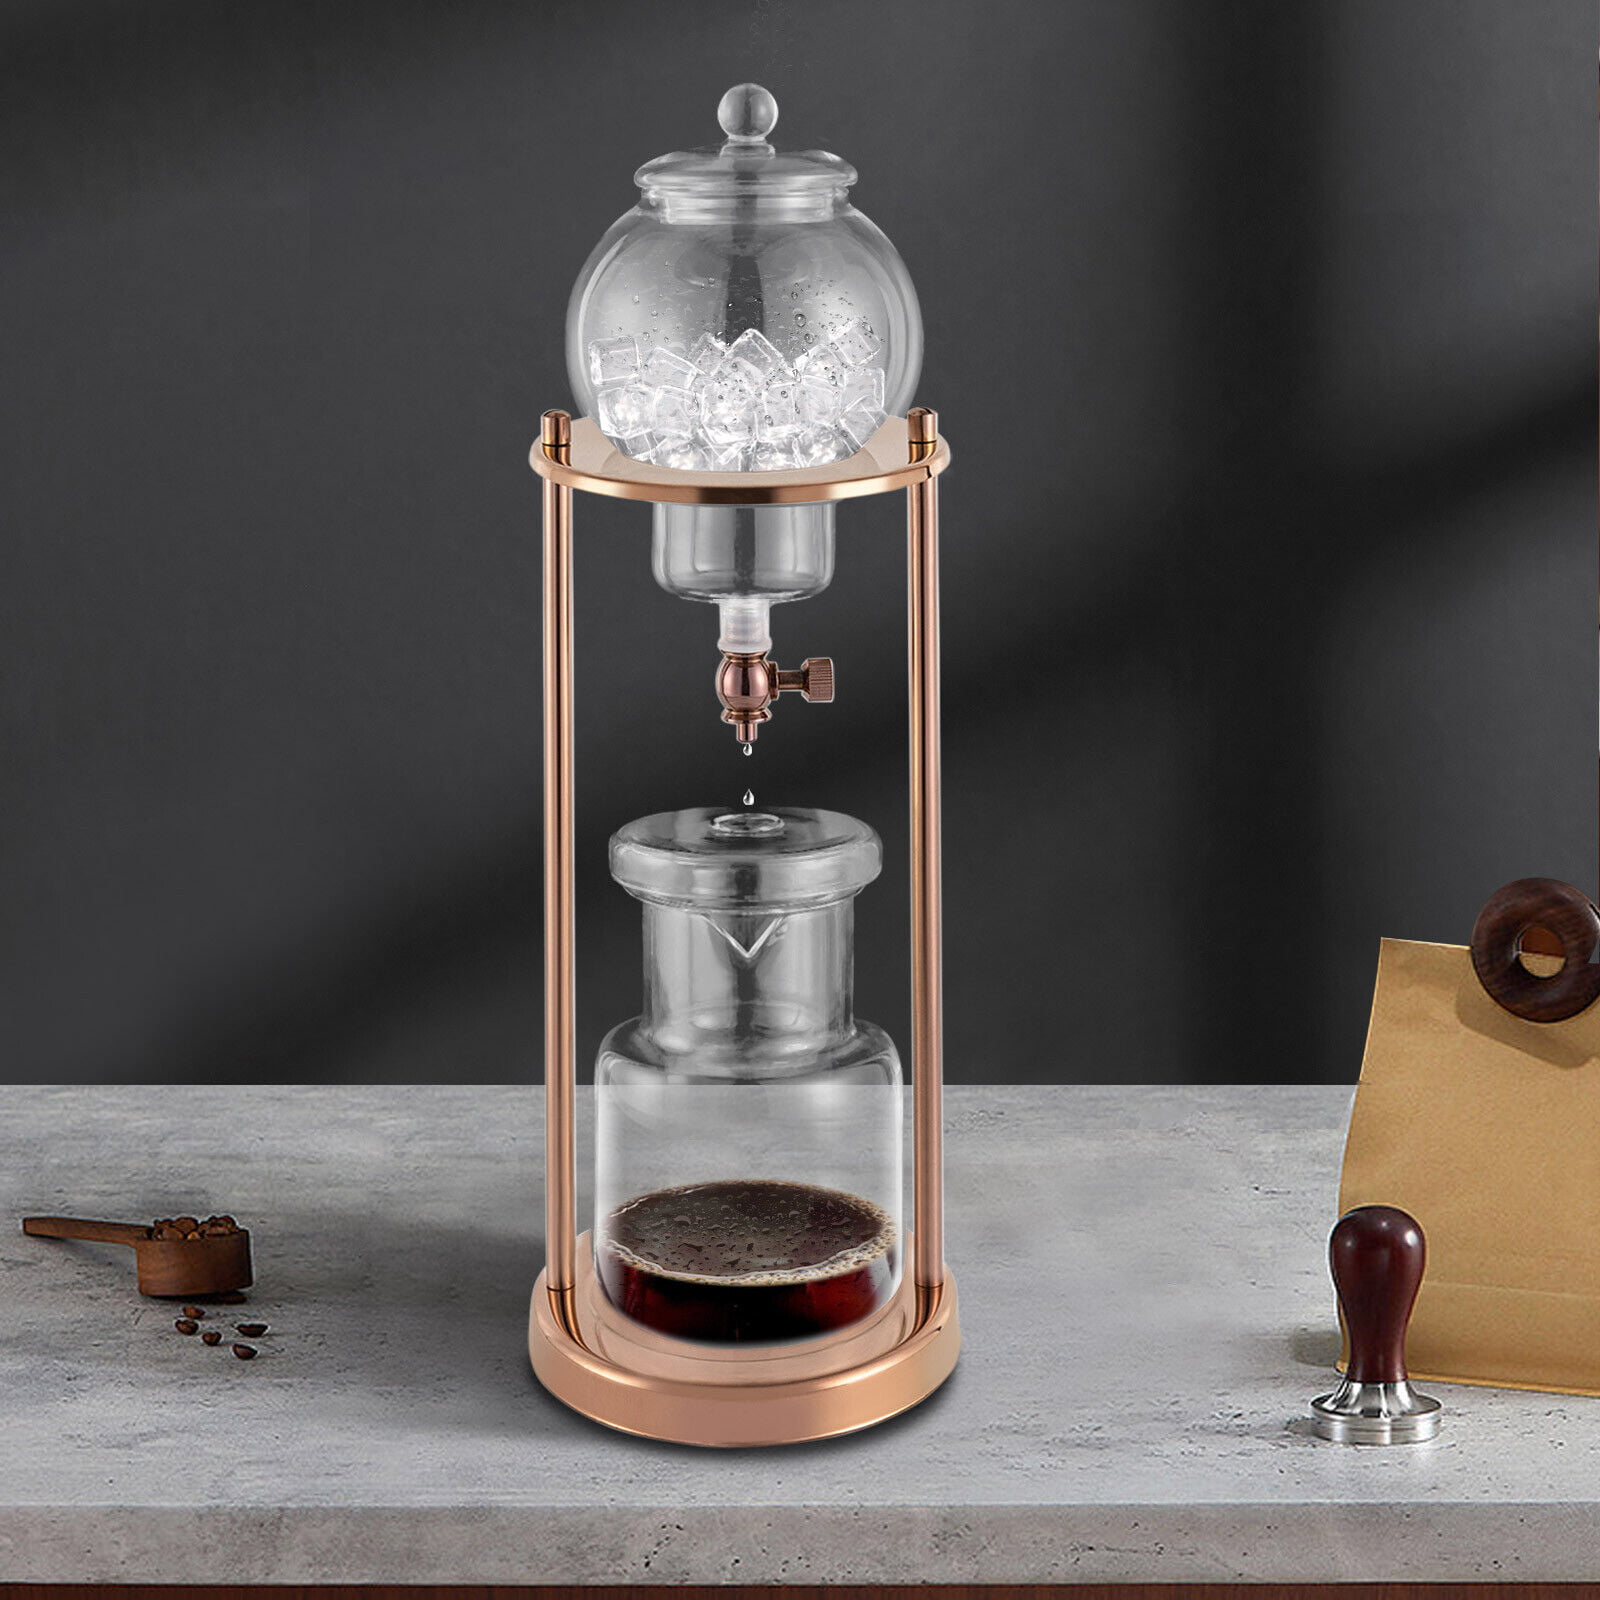 Cold Brew Coffe ☕ Mueller QuickBrew Smooth Cold Brew Coffee and Tea Maker☕  Product Link in Comment 👉 